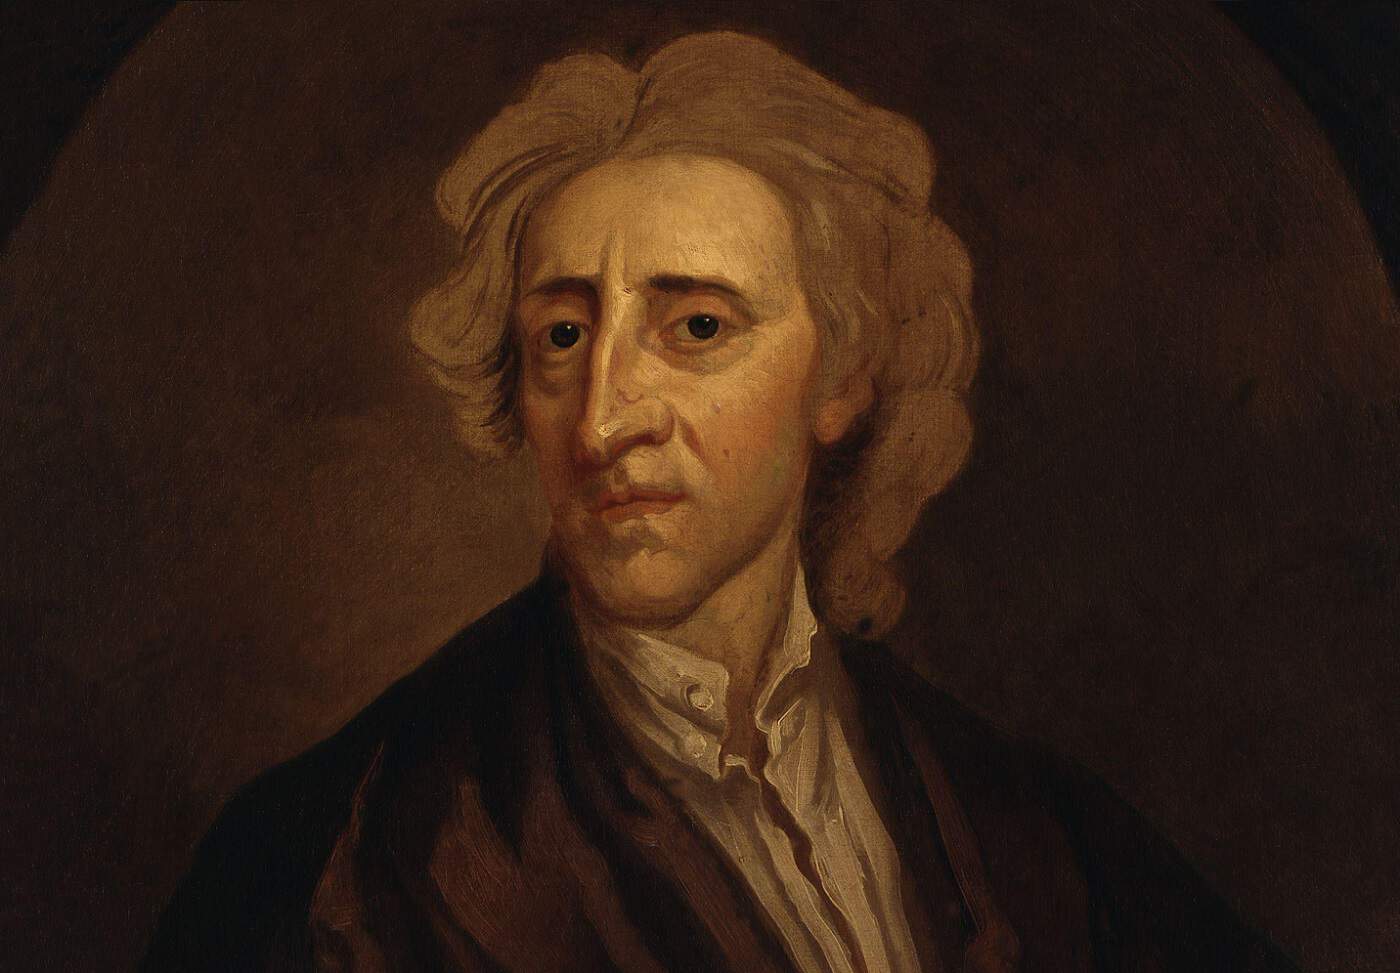 50 Great John Locke Quotes on Life, Principles, and the Government